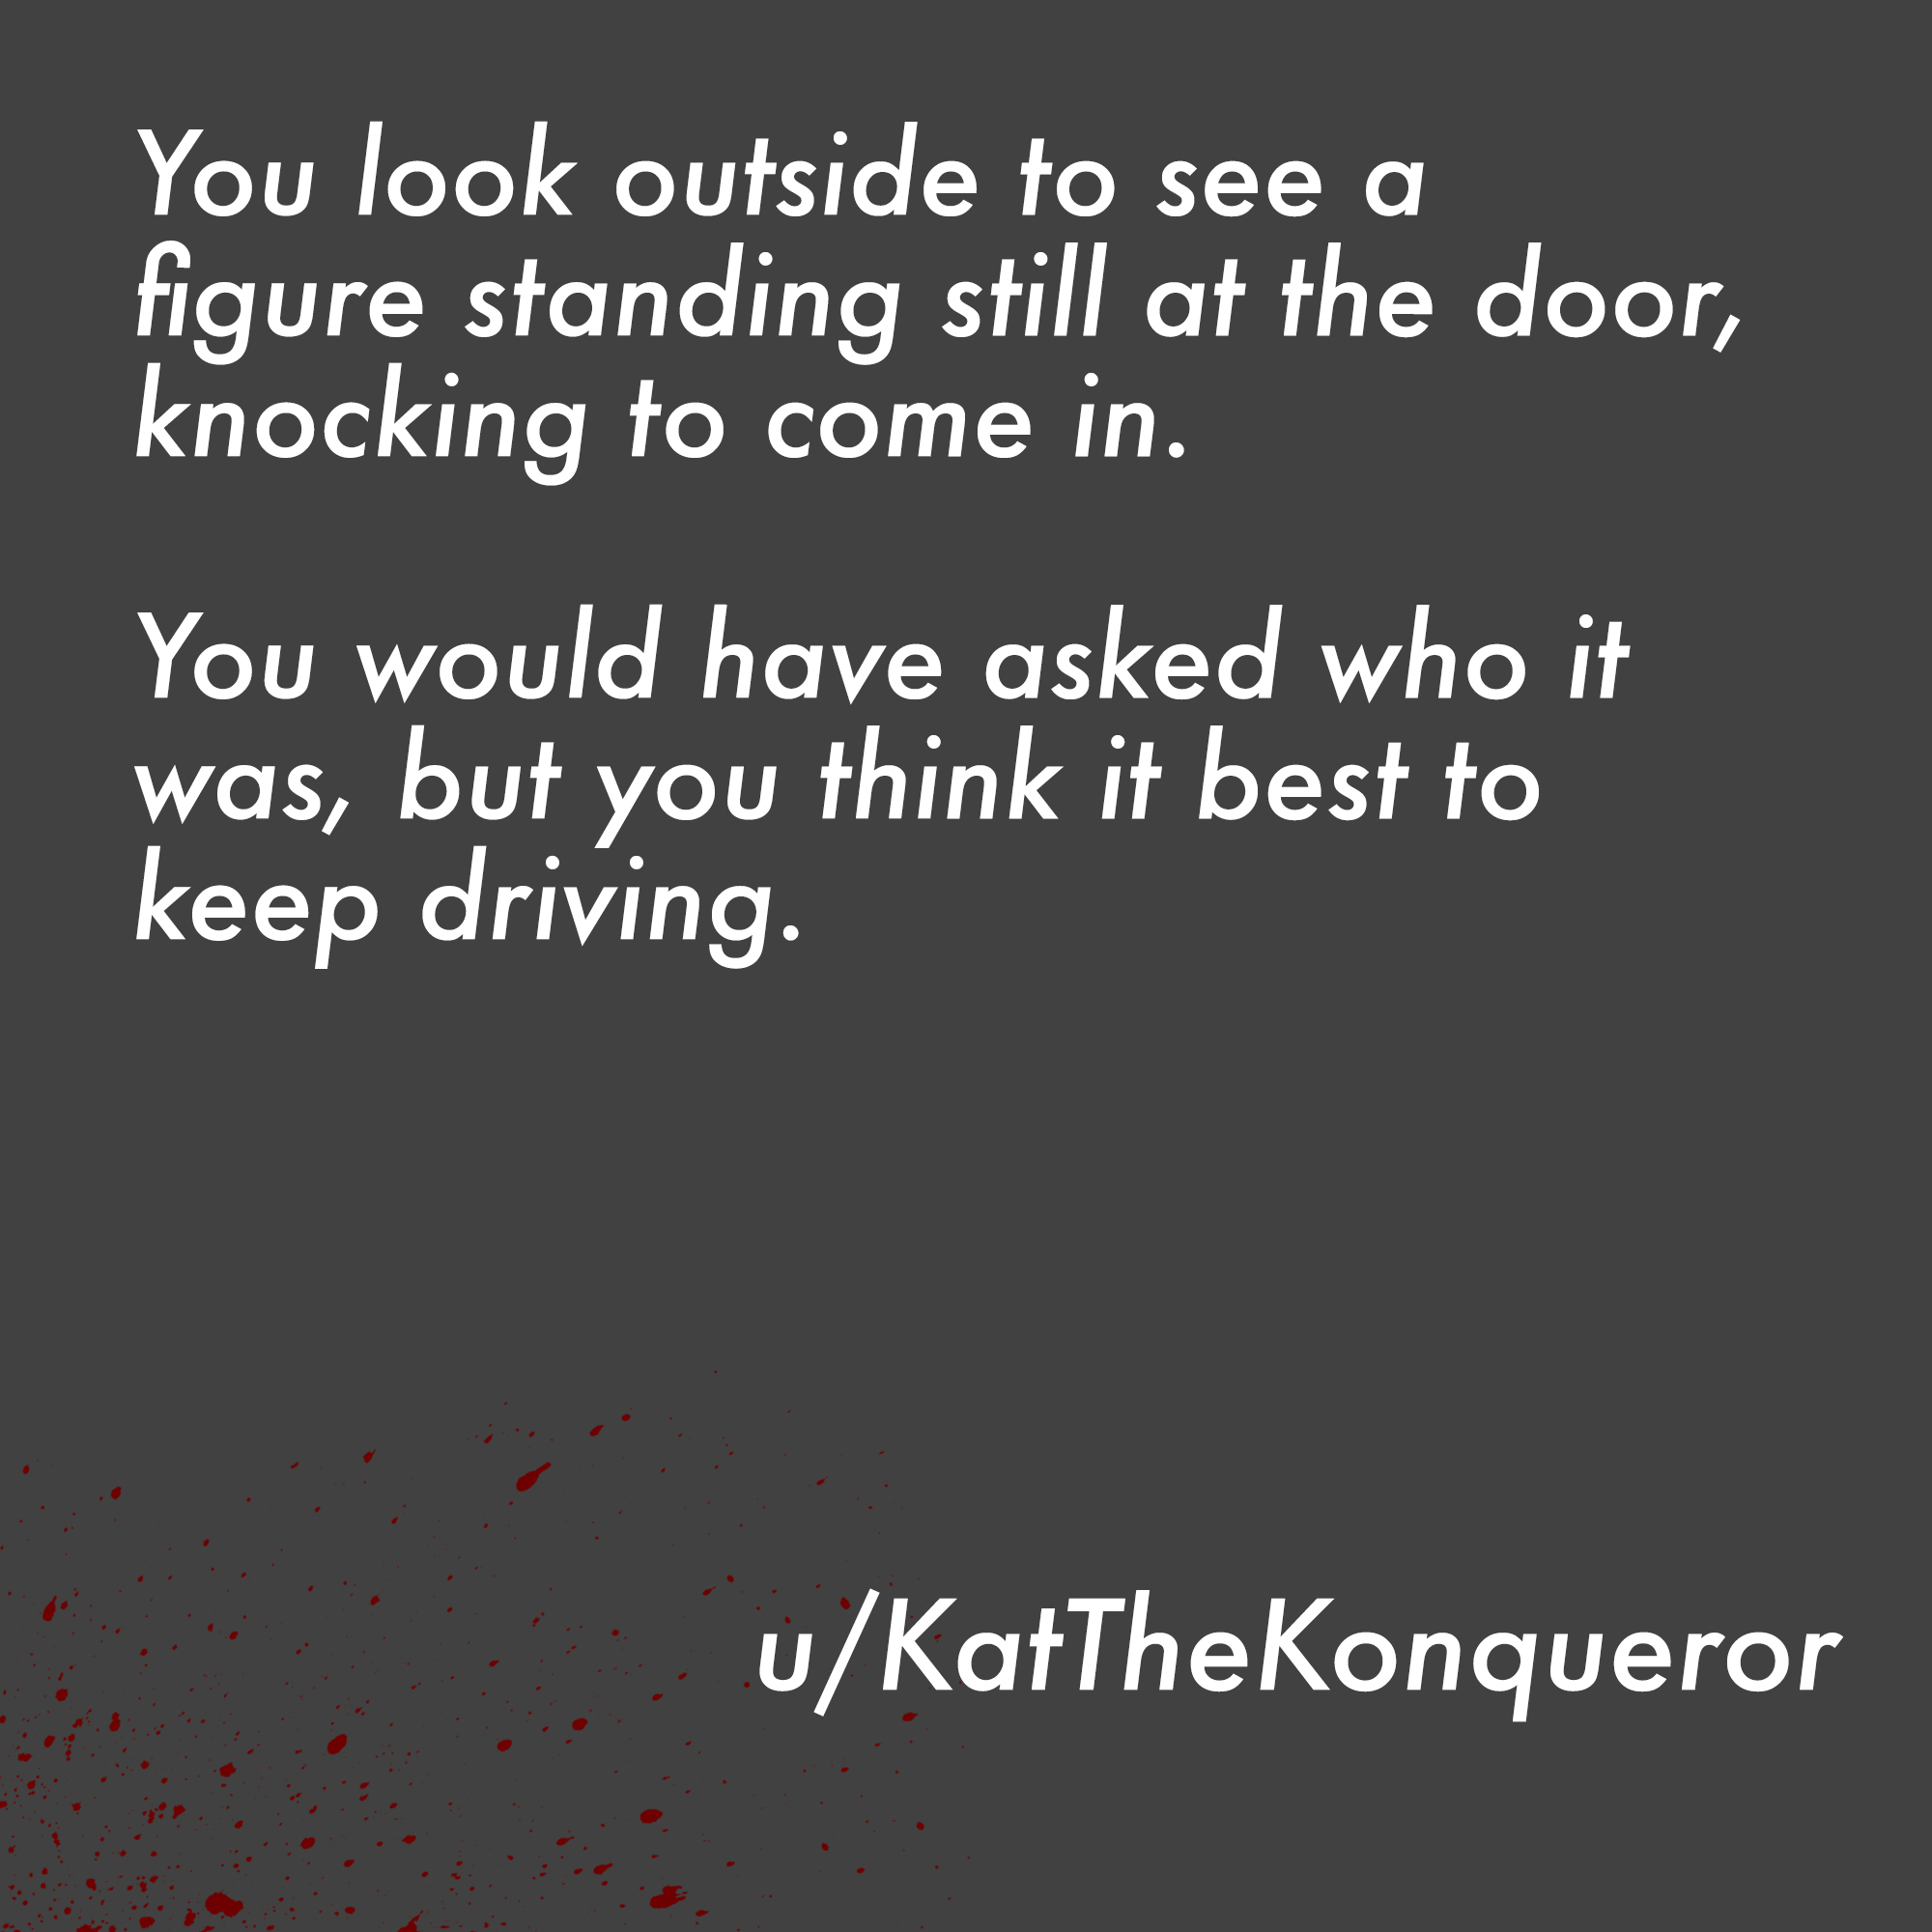 two line horror stories - make it happen - You look outside to see a figure standing still at the door, knocking to come in. You would have asked who it was, but you think it best to keep driving. uKatTheKonqueror